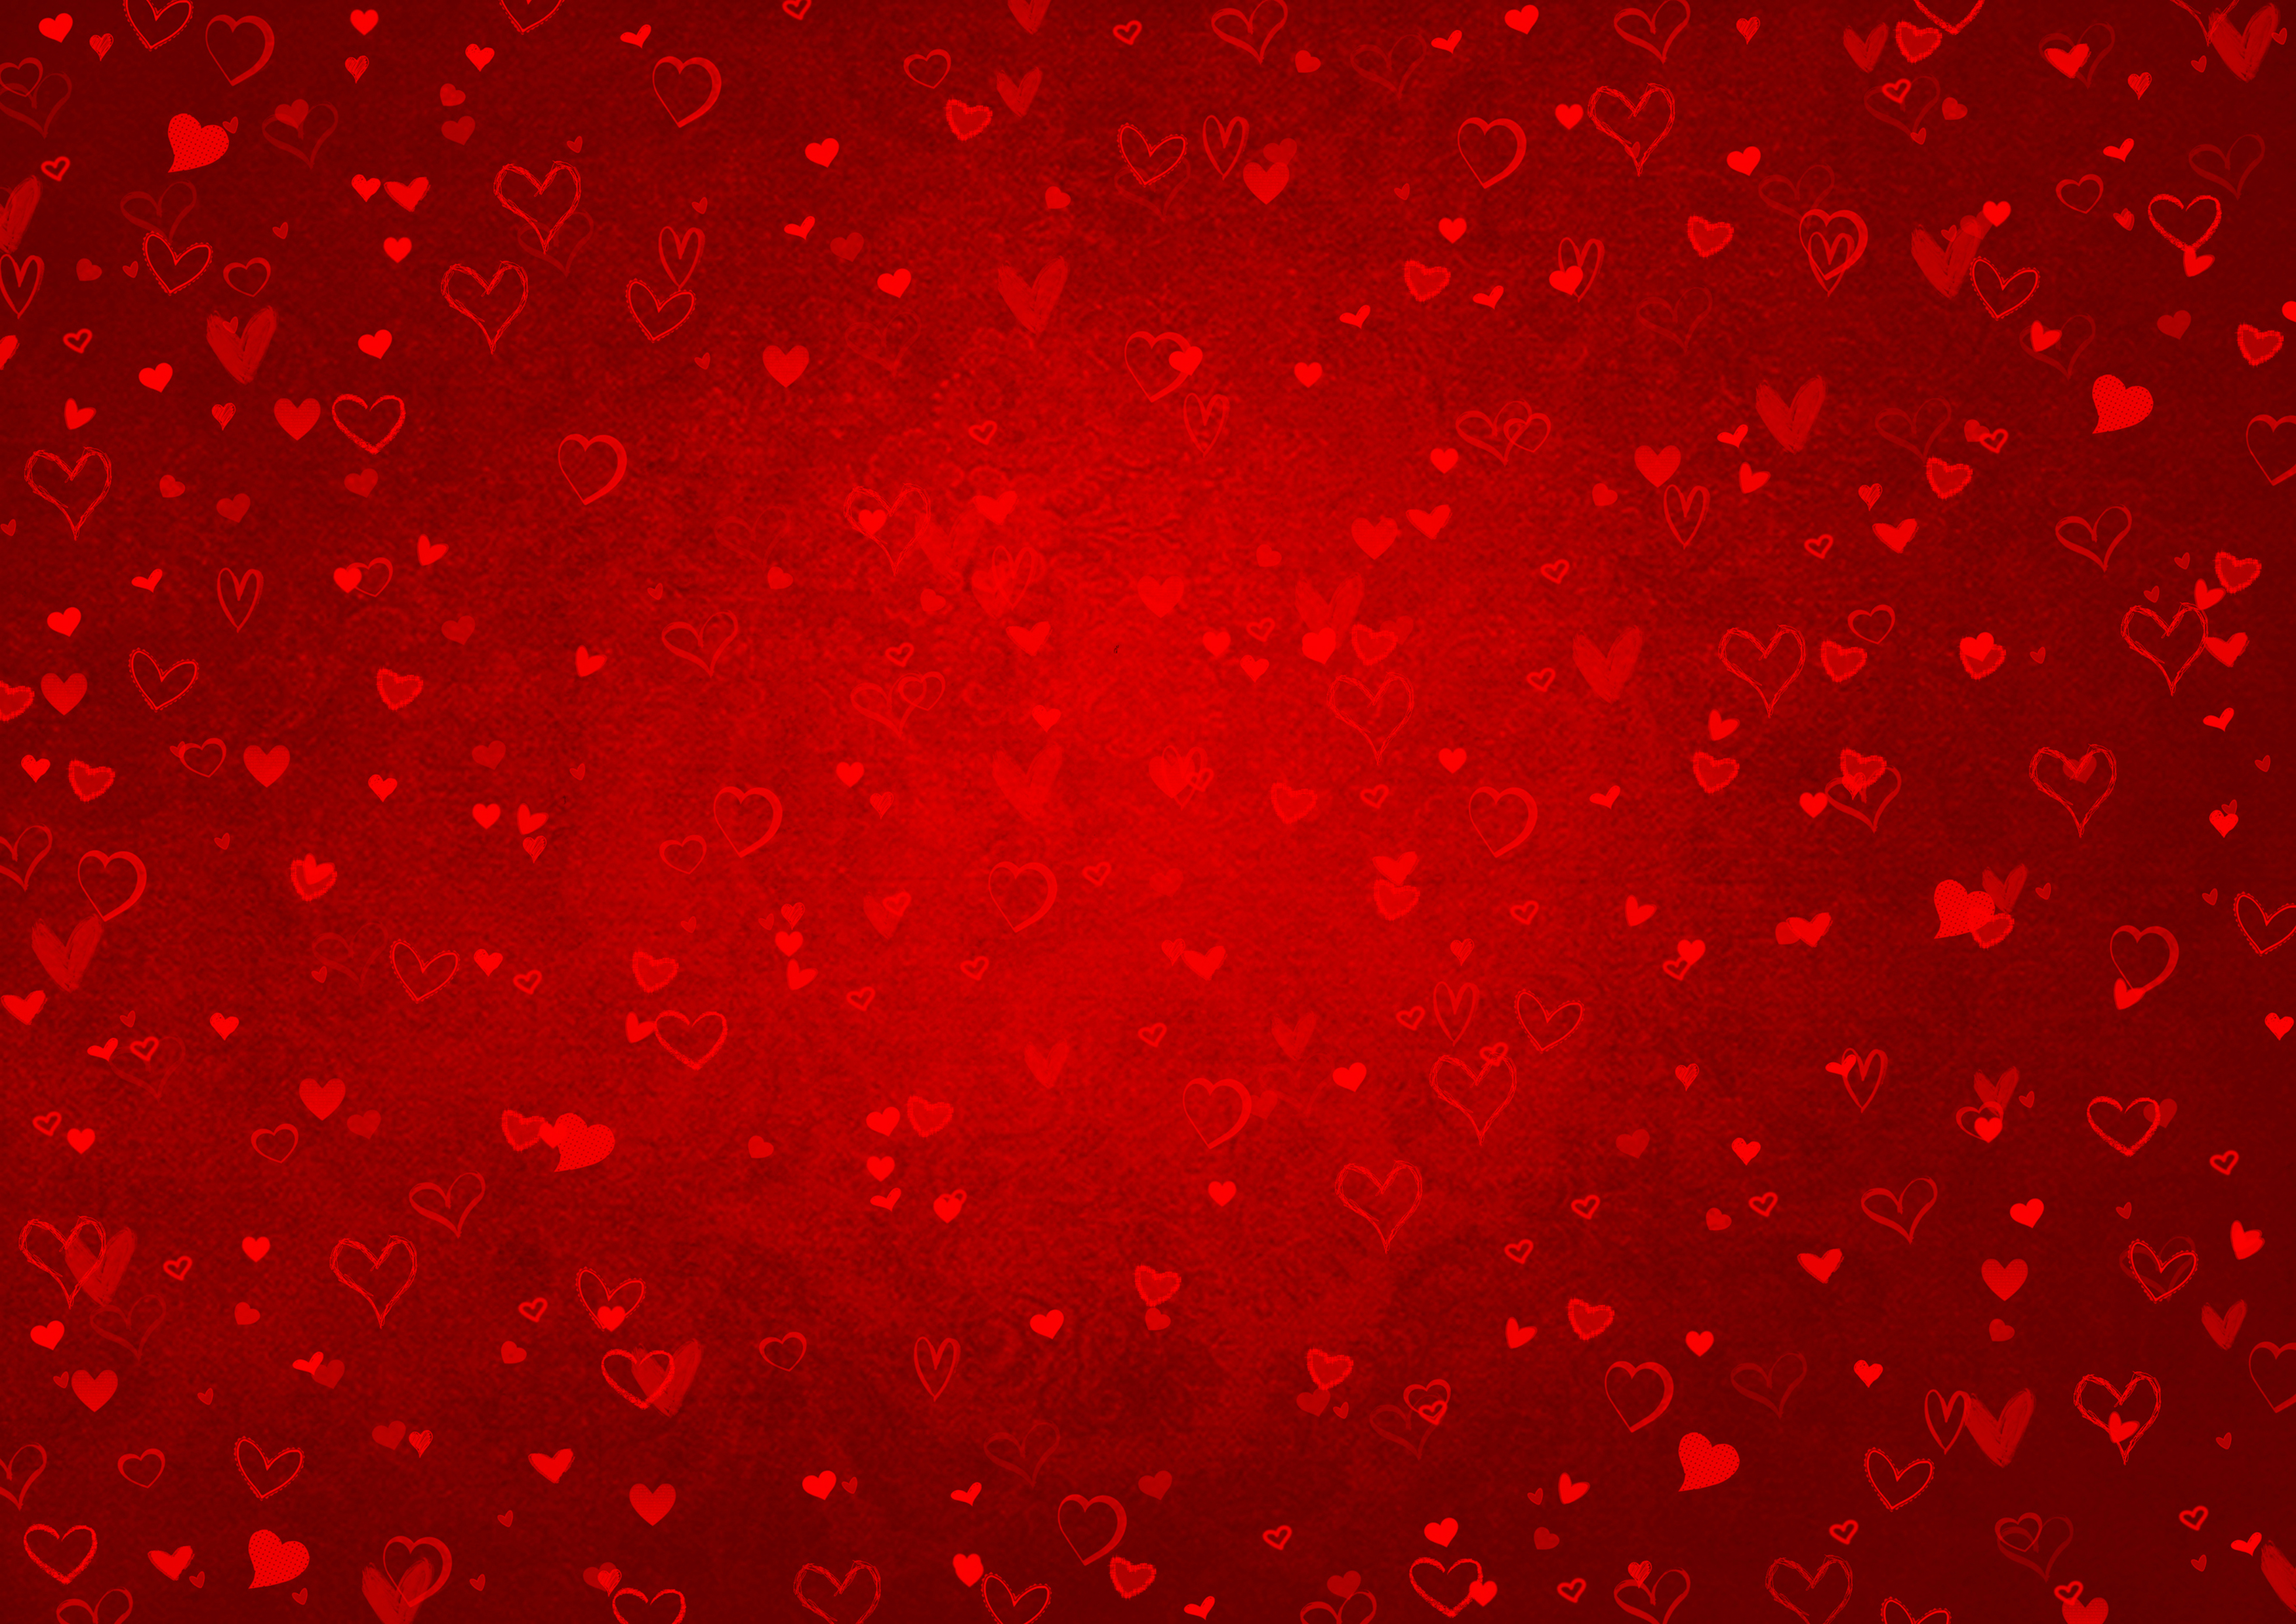 Red Background With Hearts Gallery Yopriceville High Quality